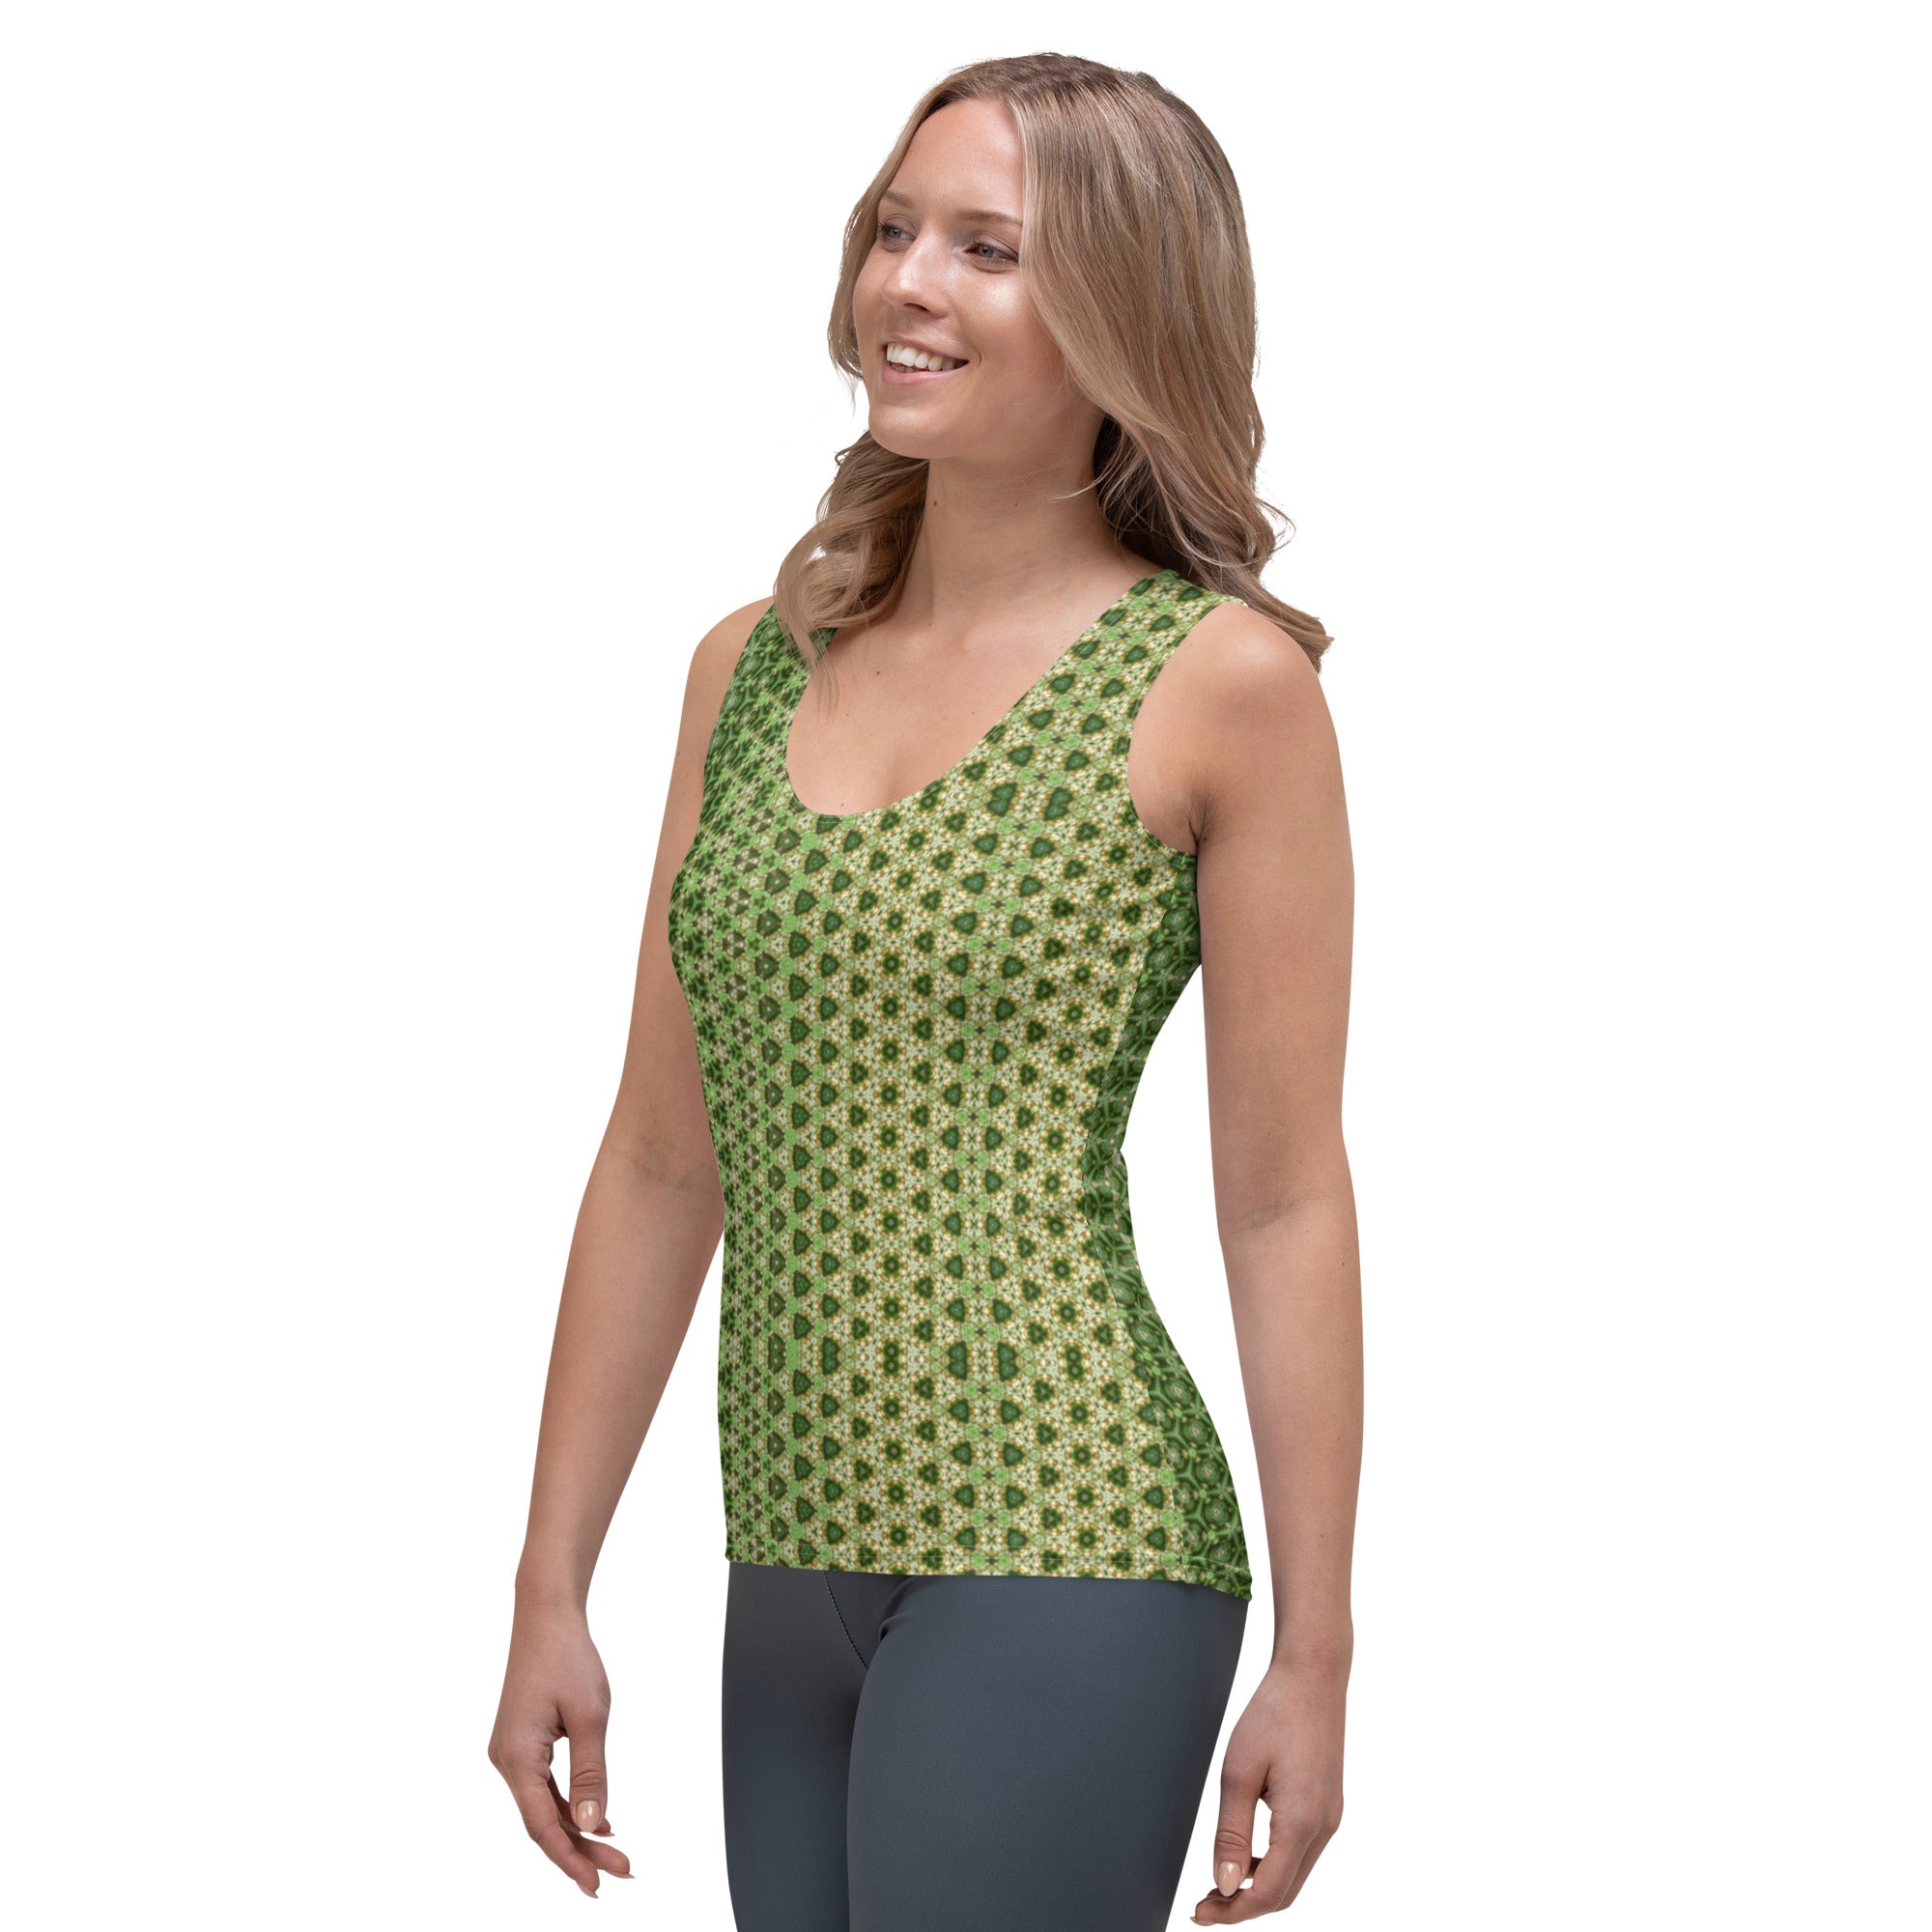 Scarabee Green Pyramid patterned Sublimation Cut & Sew Tank Top, by Sensus Studio Design